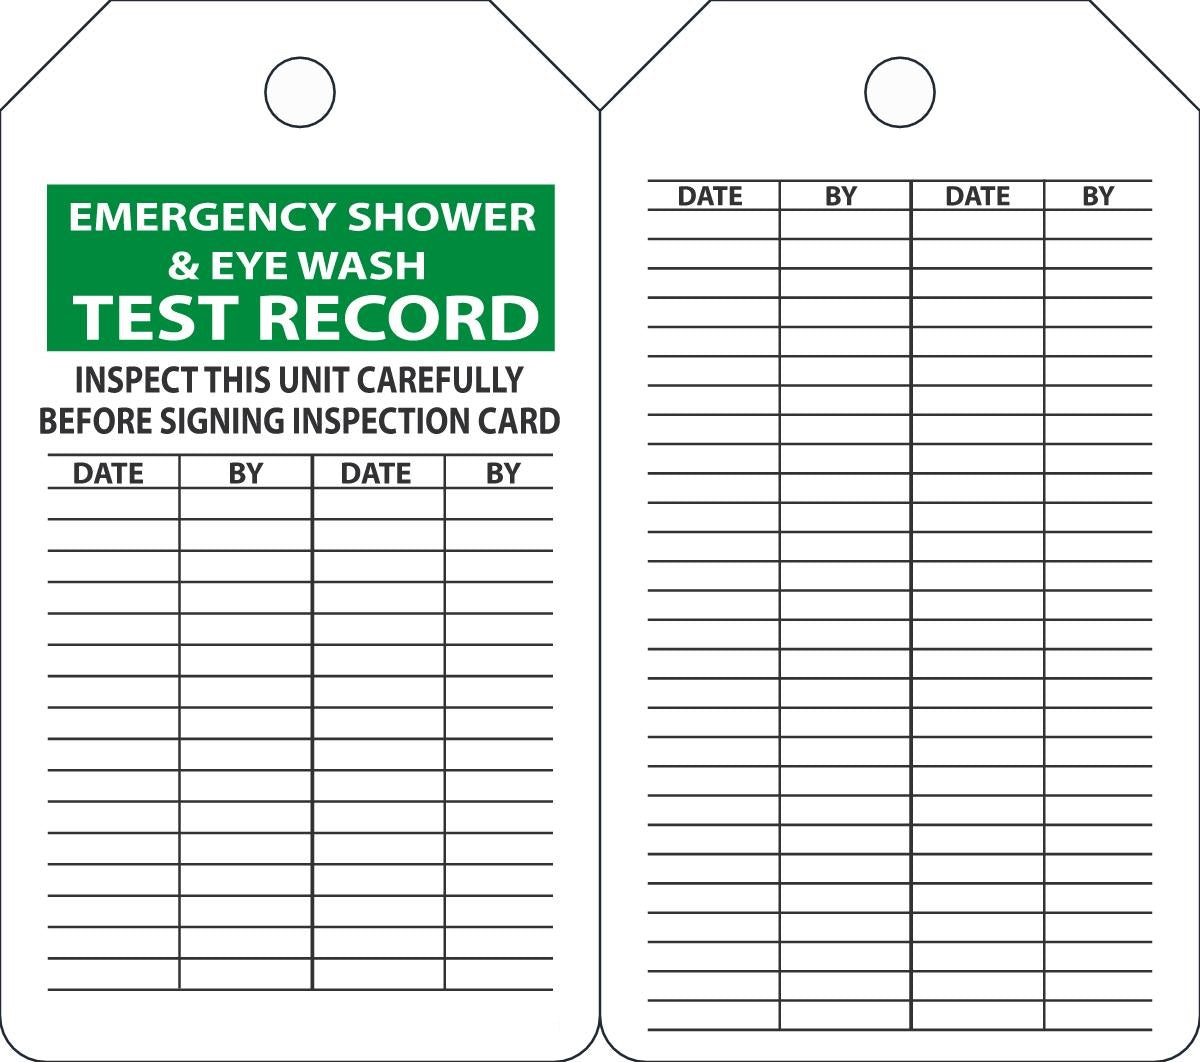 5 3/4" X 3 1/4" Black, Green And White 10 mil PF-Cardstock English Equipment Status Tag "EMERGENCY SHOWER & EYEWASH TEST RECORD INSPECT THIS UNIT CAREFULLY BEFORE SIGNING INSPECTION